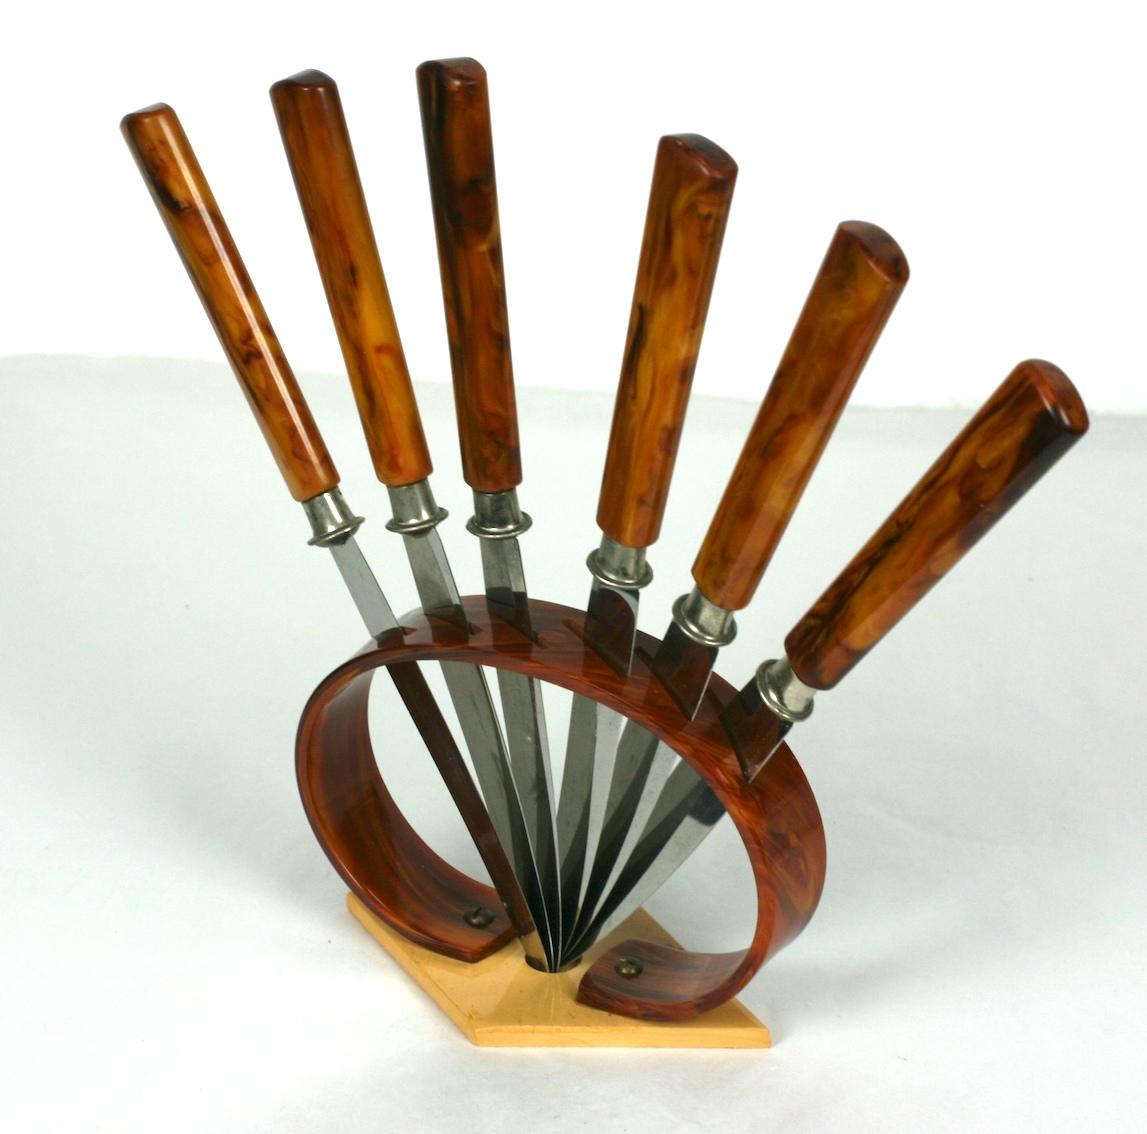 Art Deco Bakelite Fruit Knife Set from the 1930's. Made in Germany. Butterscotch bakelite handled knives are set into a bakelite stand designed to display beautifully. 
Excellent condition.  1930's. 